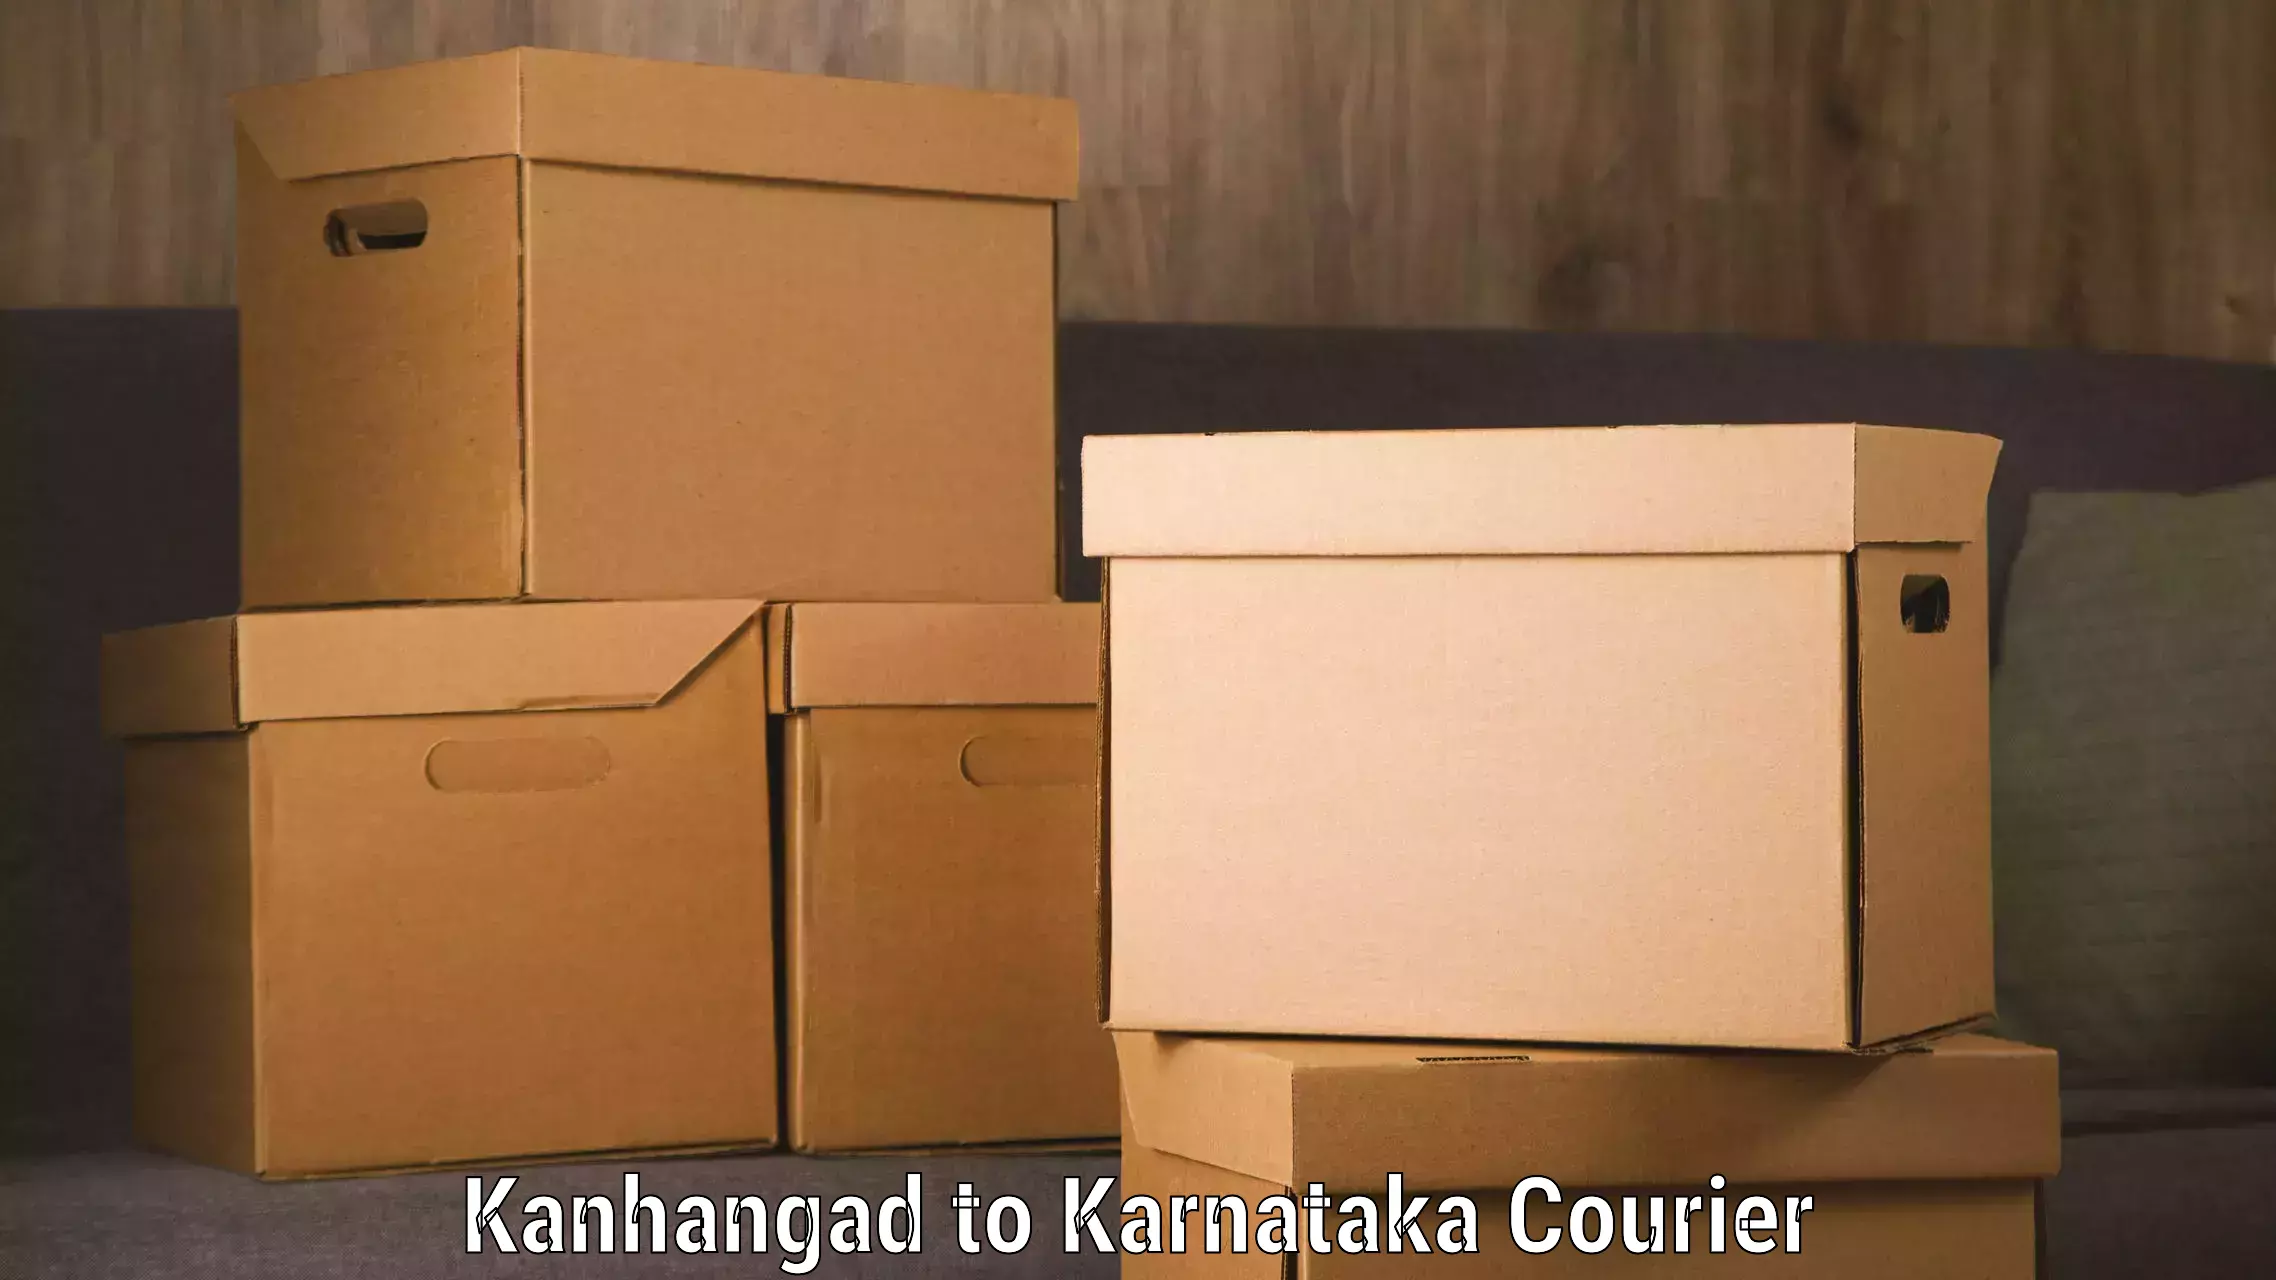 Round-the-clock parcel delivery in Kanhangad to Yellapur